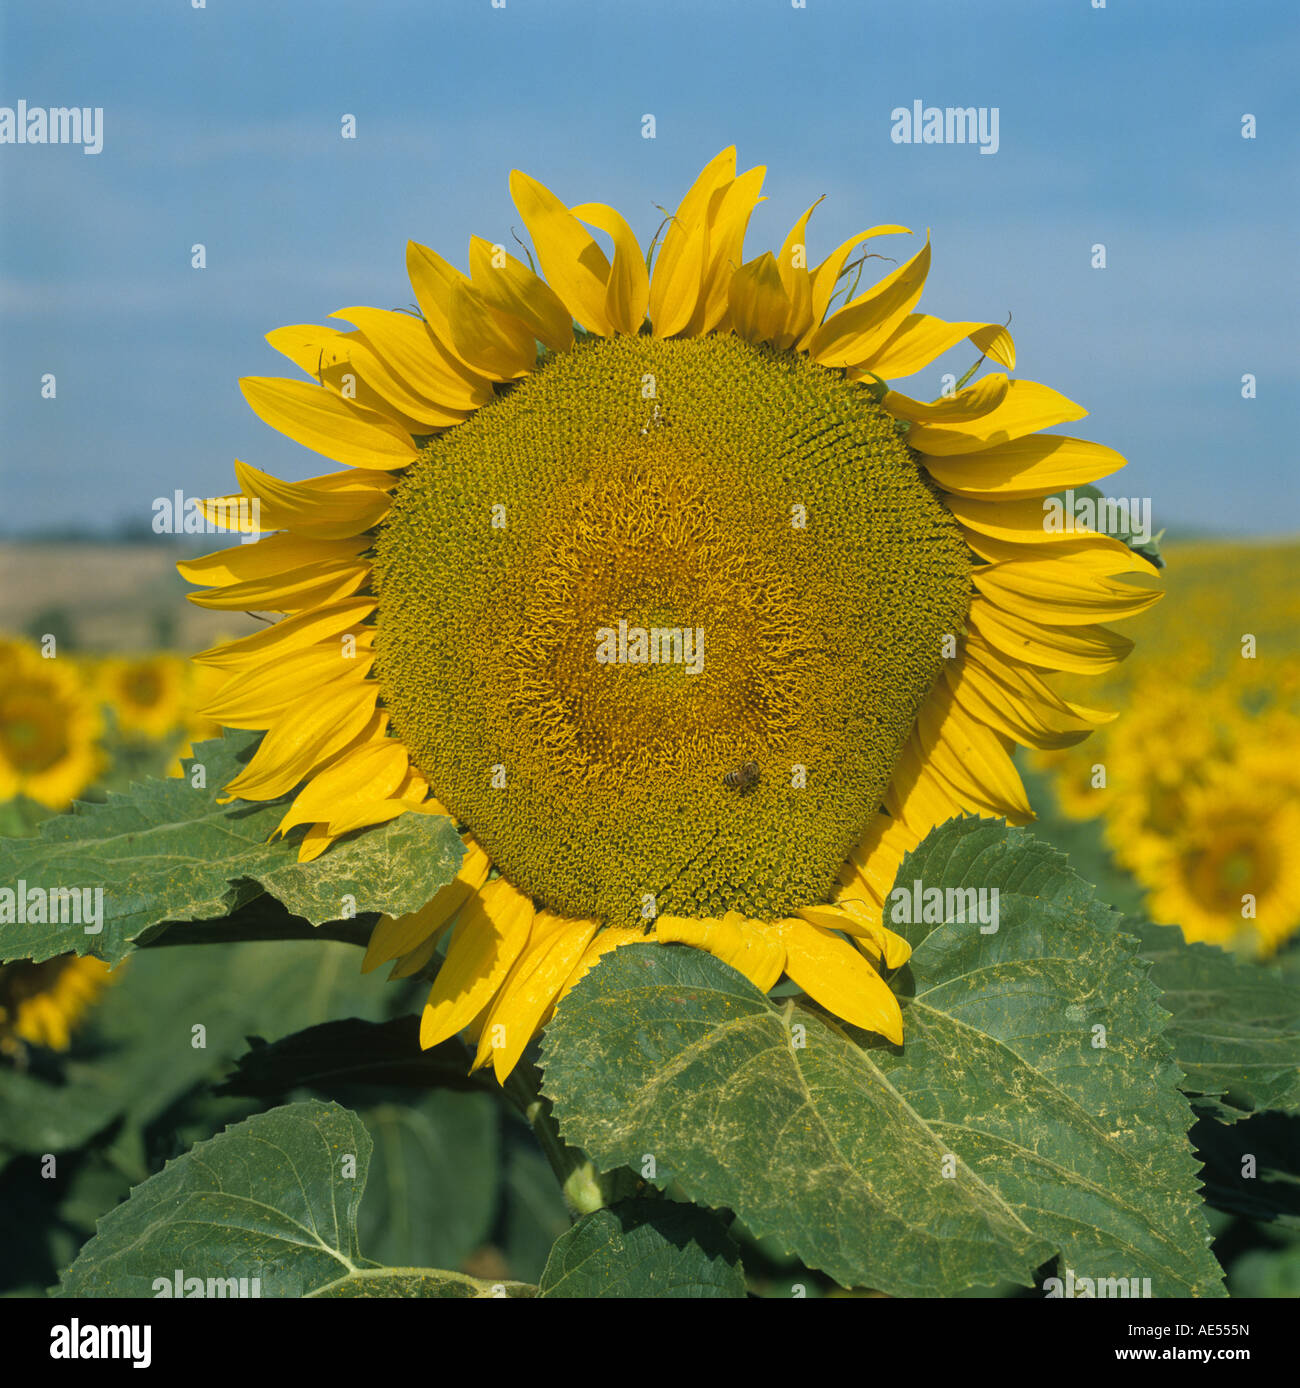 Large sunflower flower on a fine day in Tuscany Italy Stock Photo